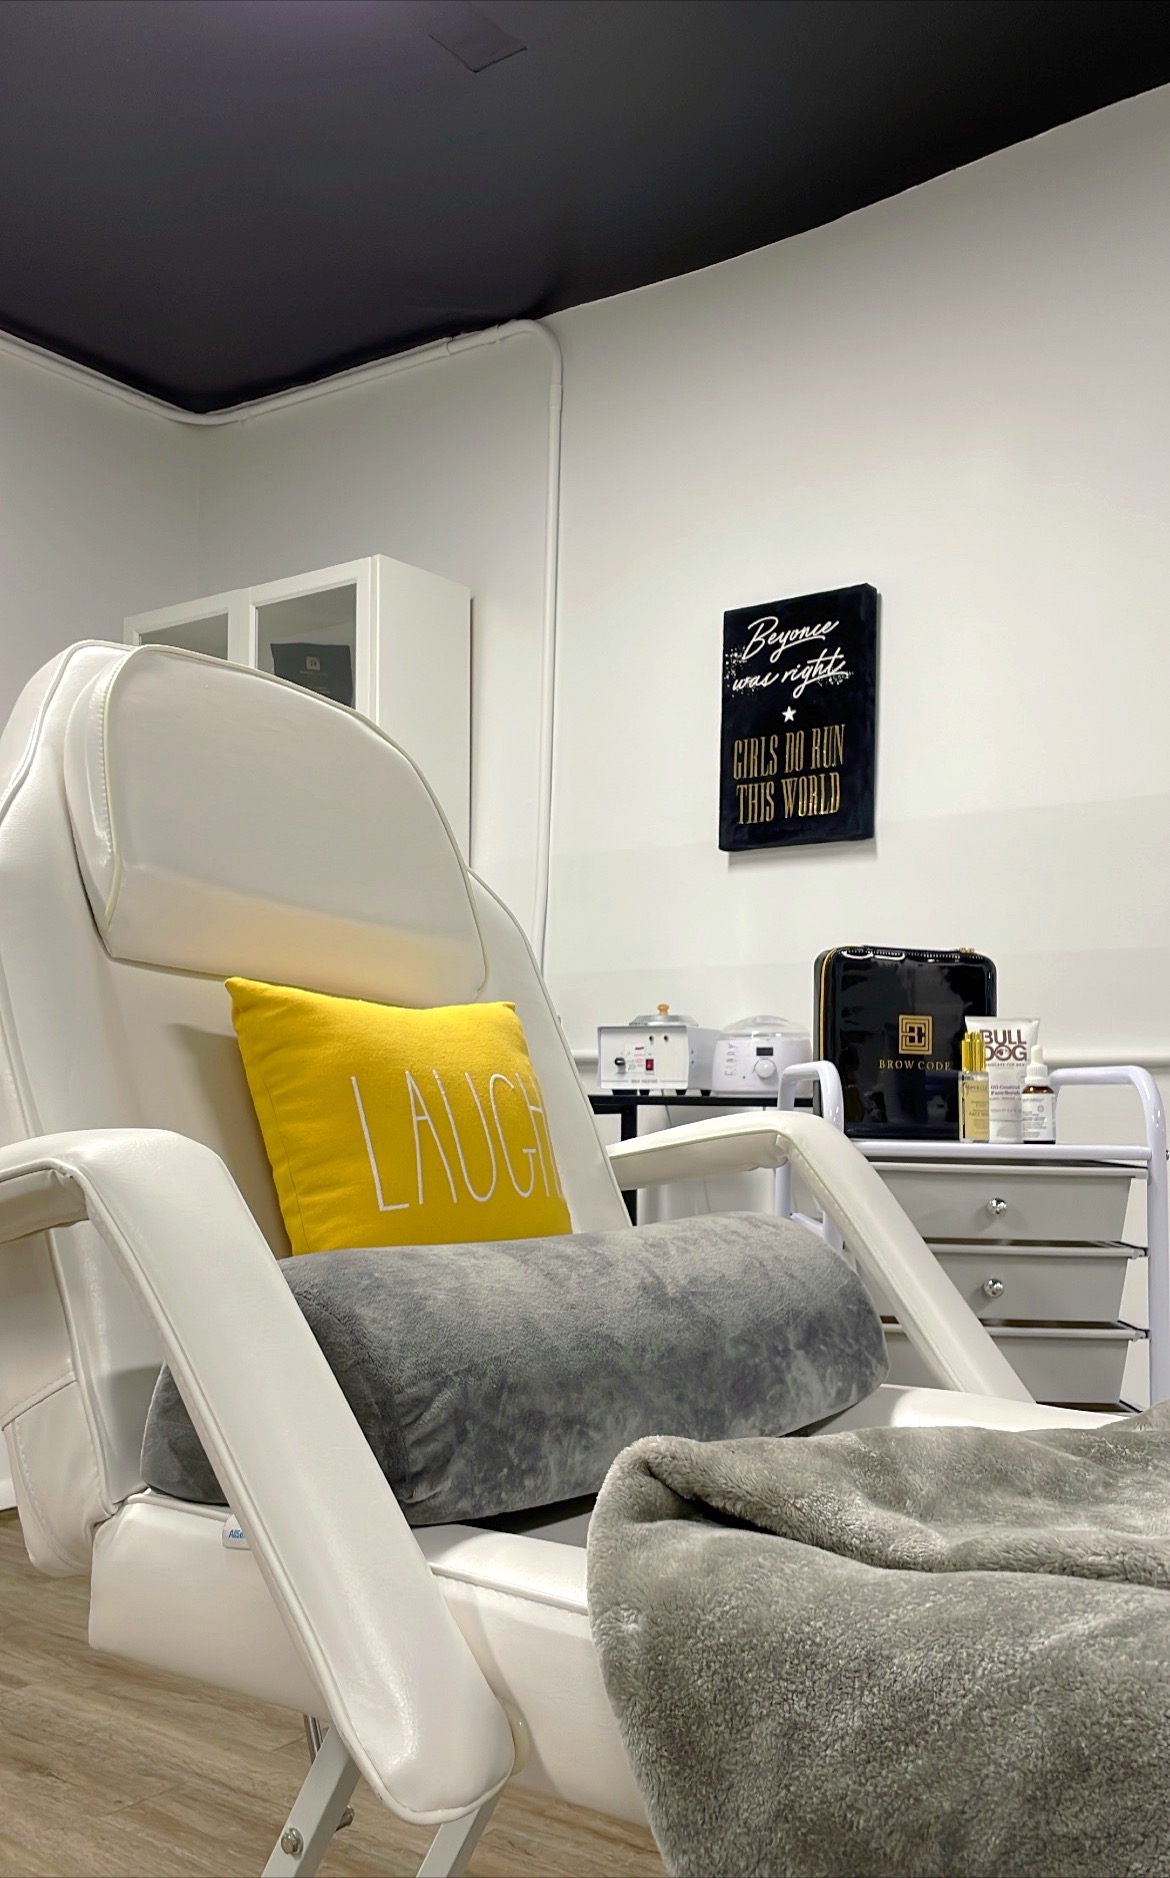 One of the salon chairs. It is a white reclining chair, with blankets and a yellow pillow that says "Laugh".